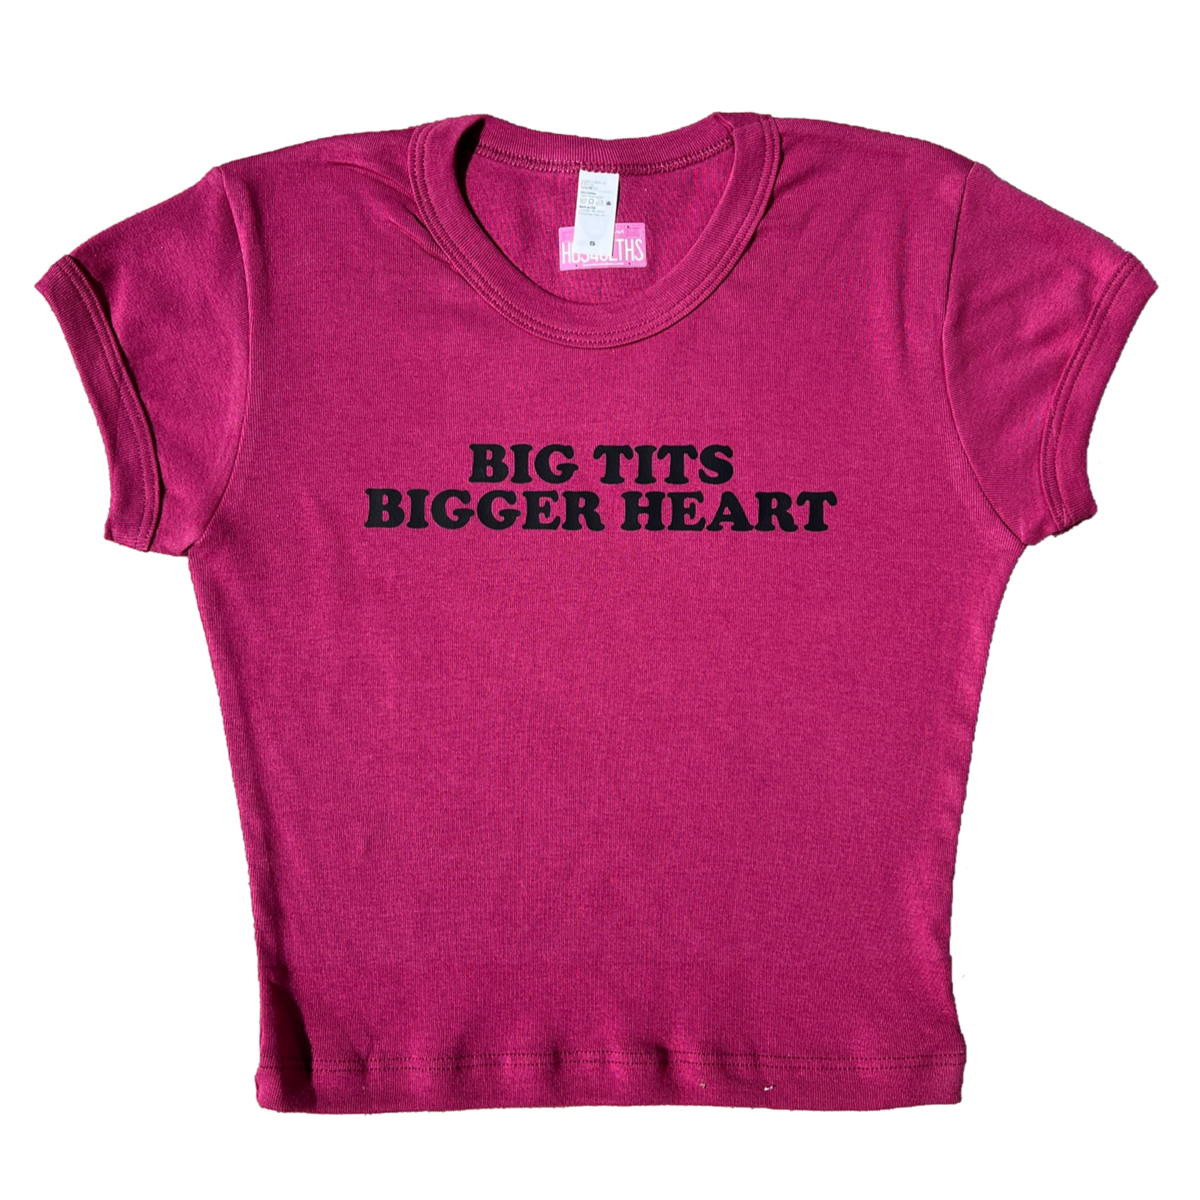 big tits bigger heart <3 baby tee – Hoes For Clothes